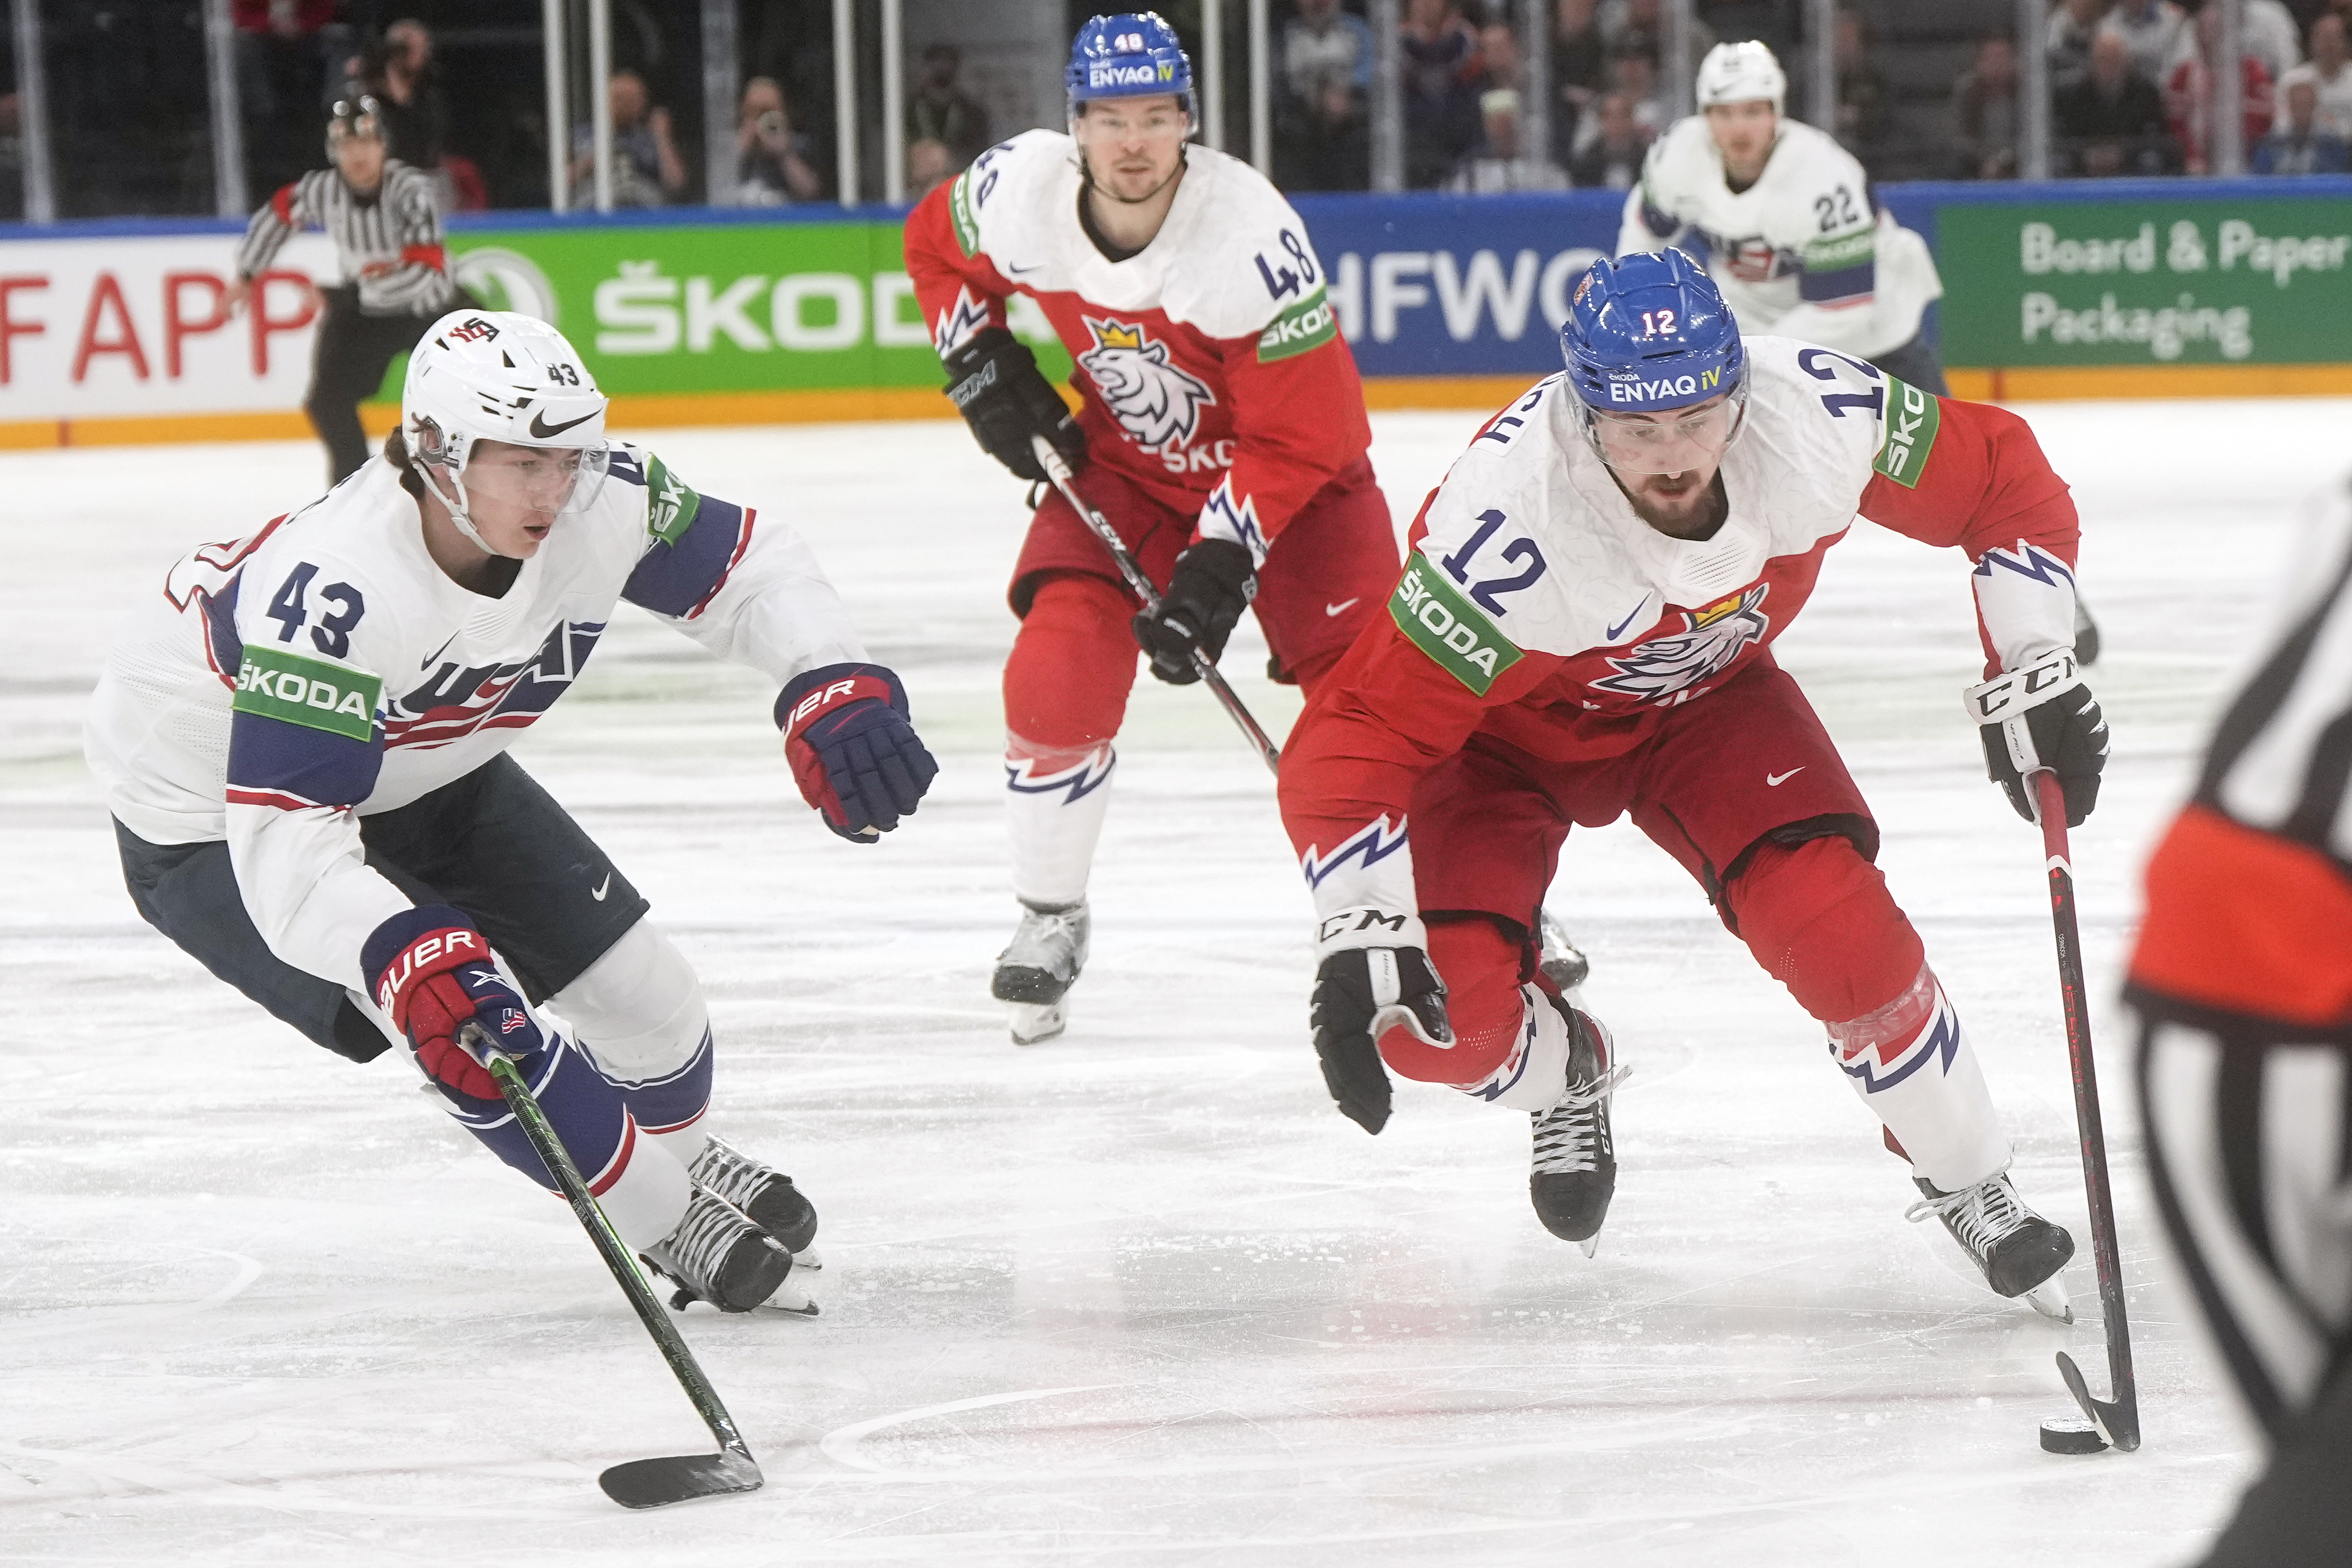 IIHF World Junior Championship 2022 TV schedule FREE live streams, TV channels, dates, times for Team USA, Canada, Sweden, more